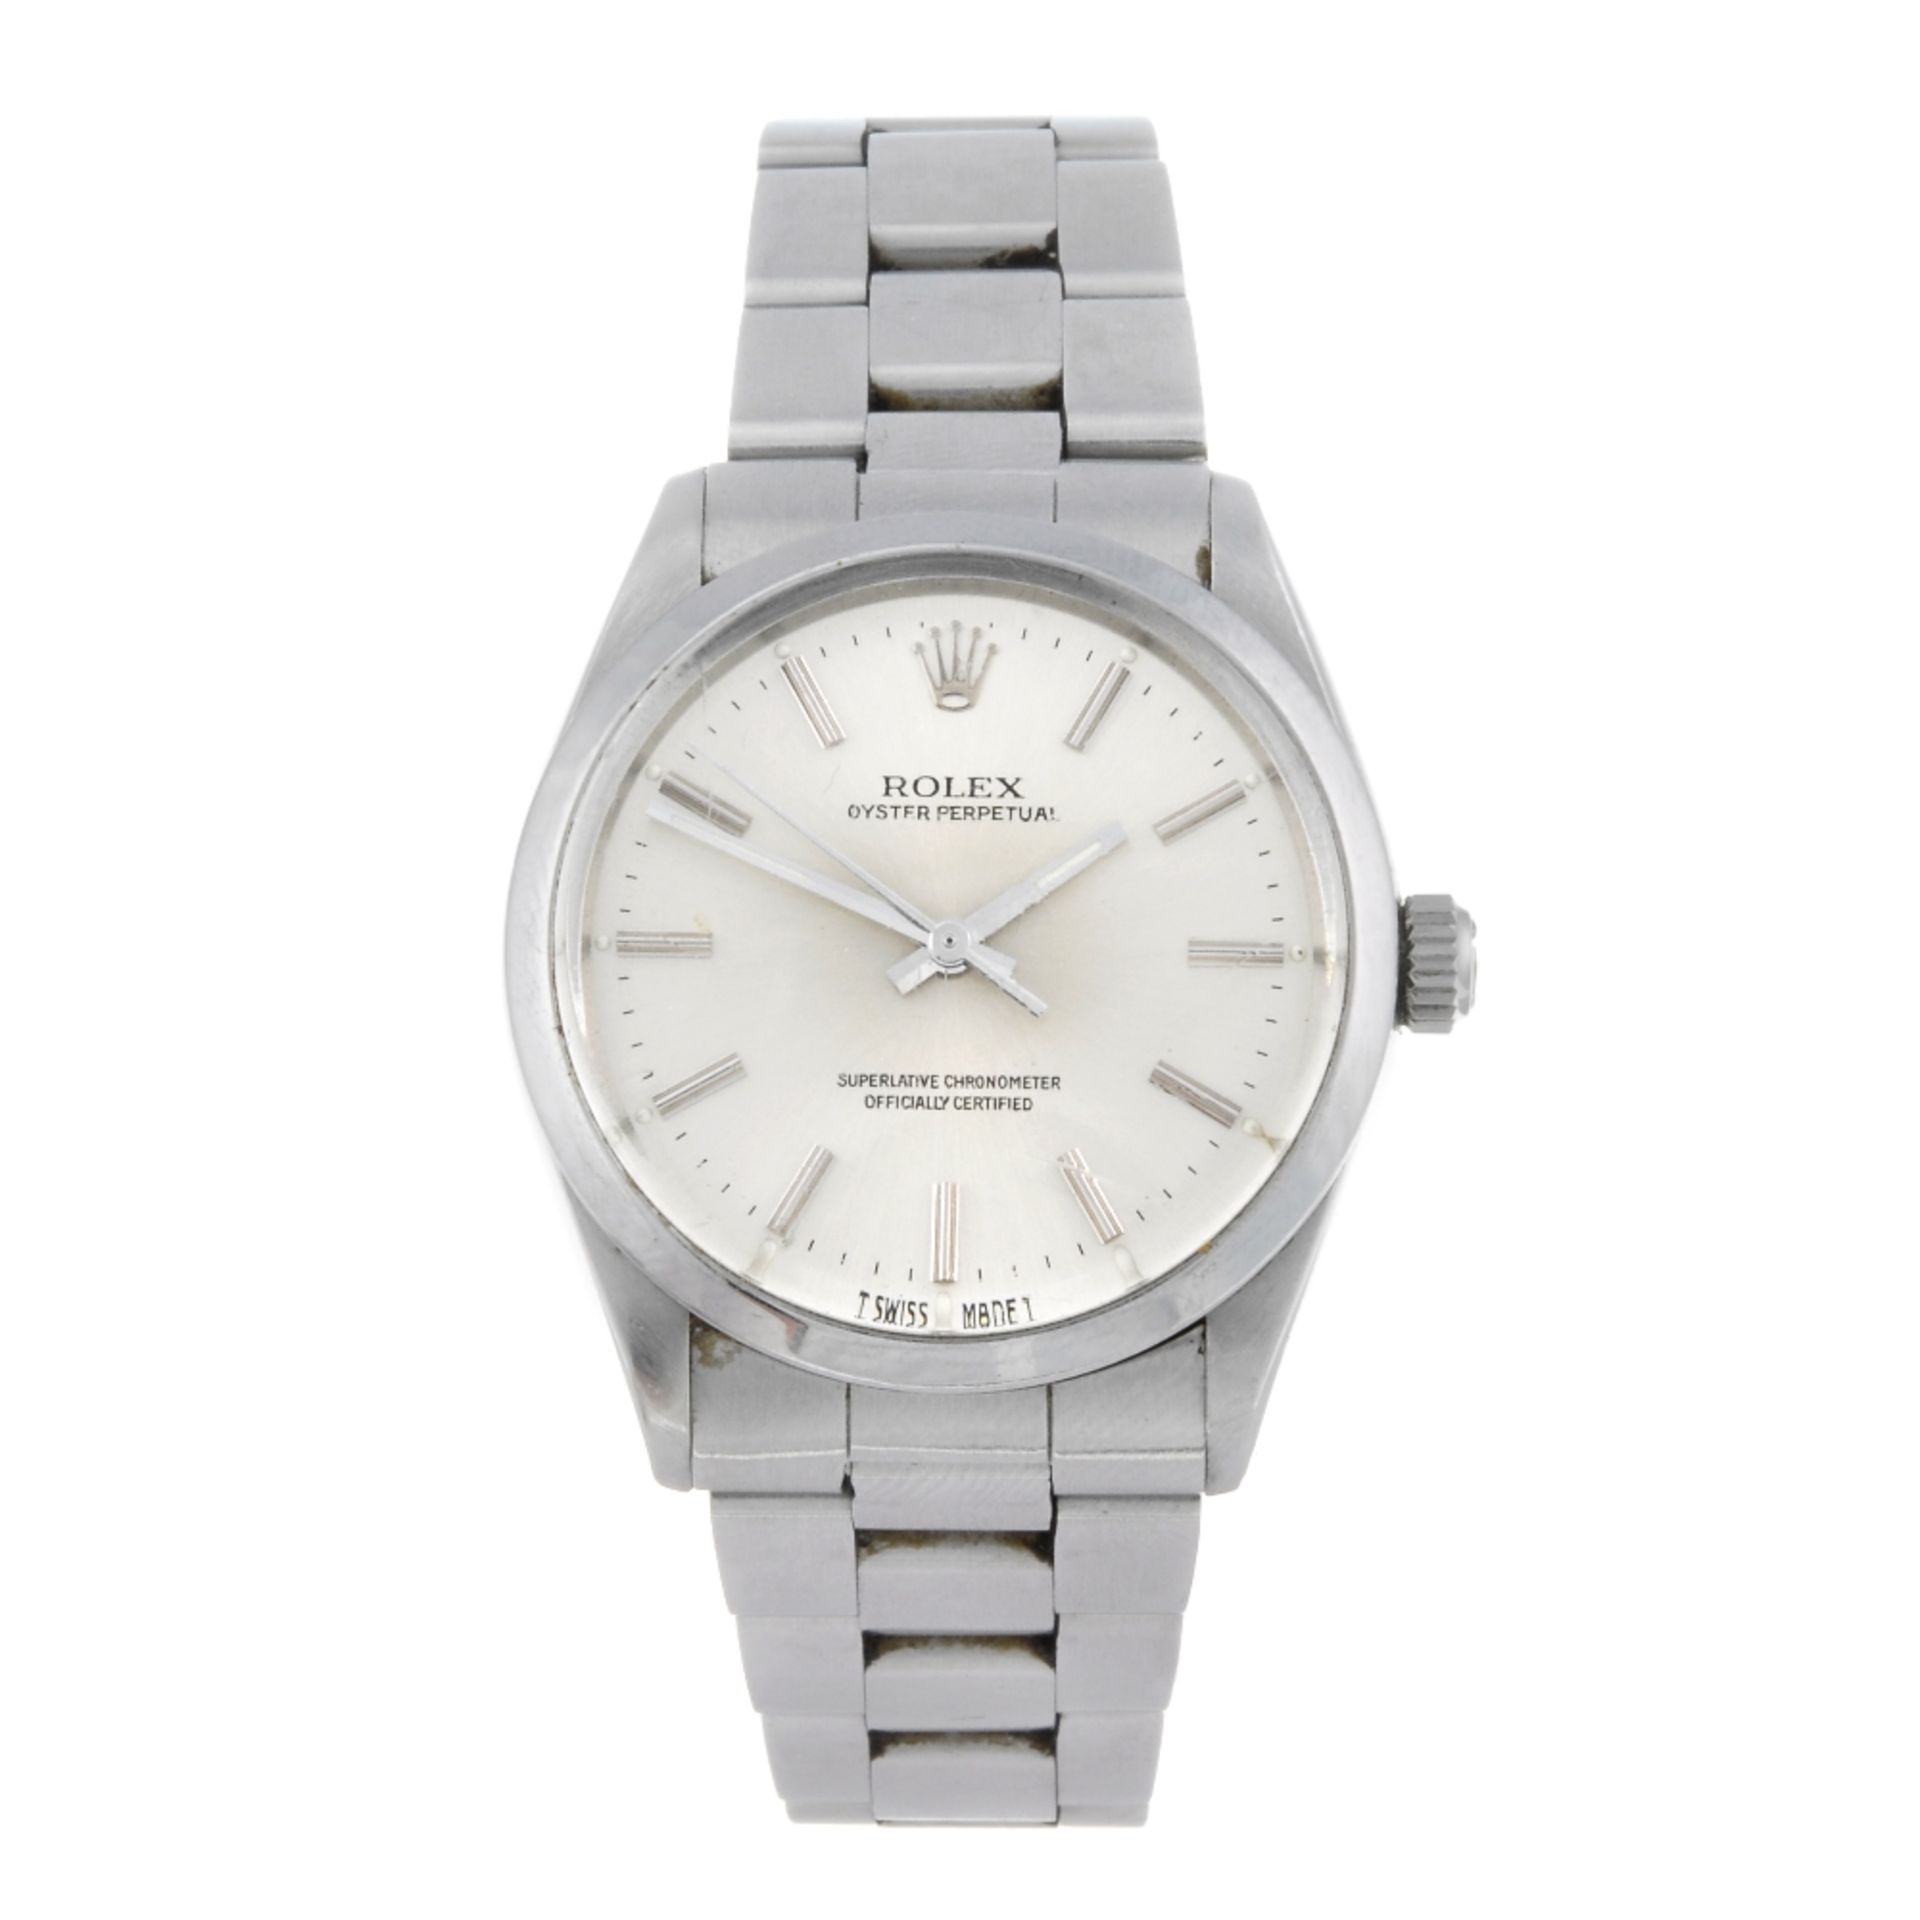 ROLEX - a gentleman's Oyster Perpetual bracelet watch. Circa 1989. Stainless steel case. Reference